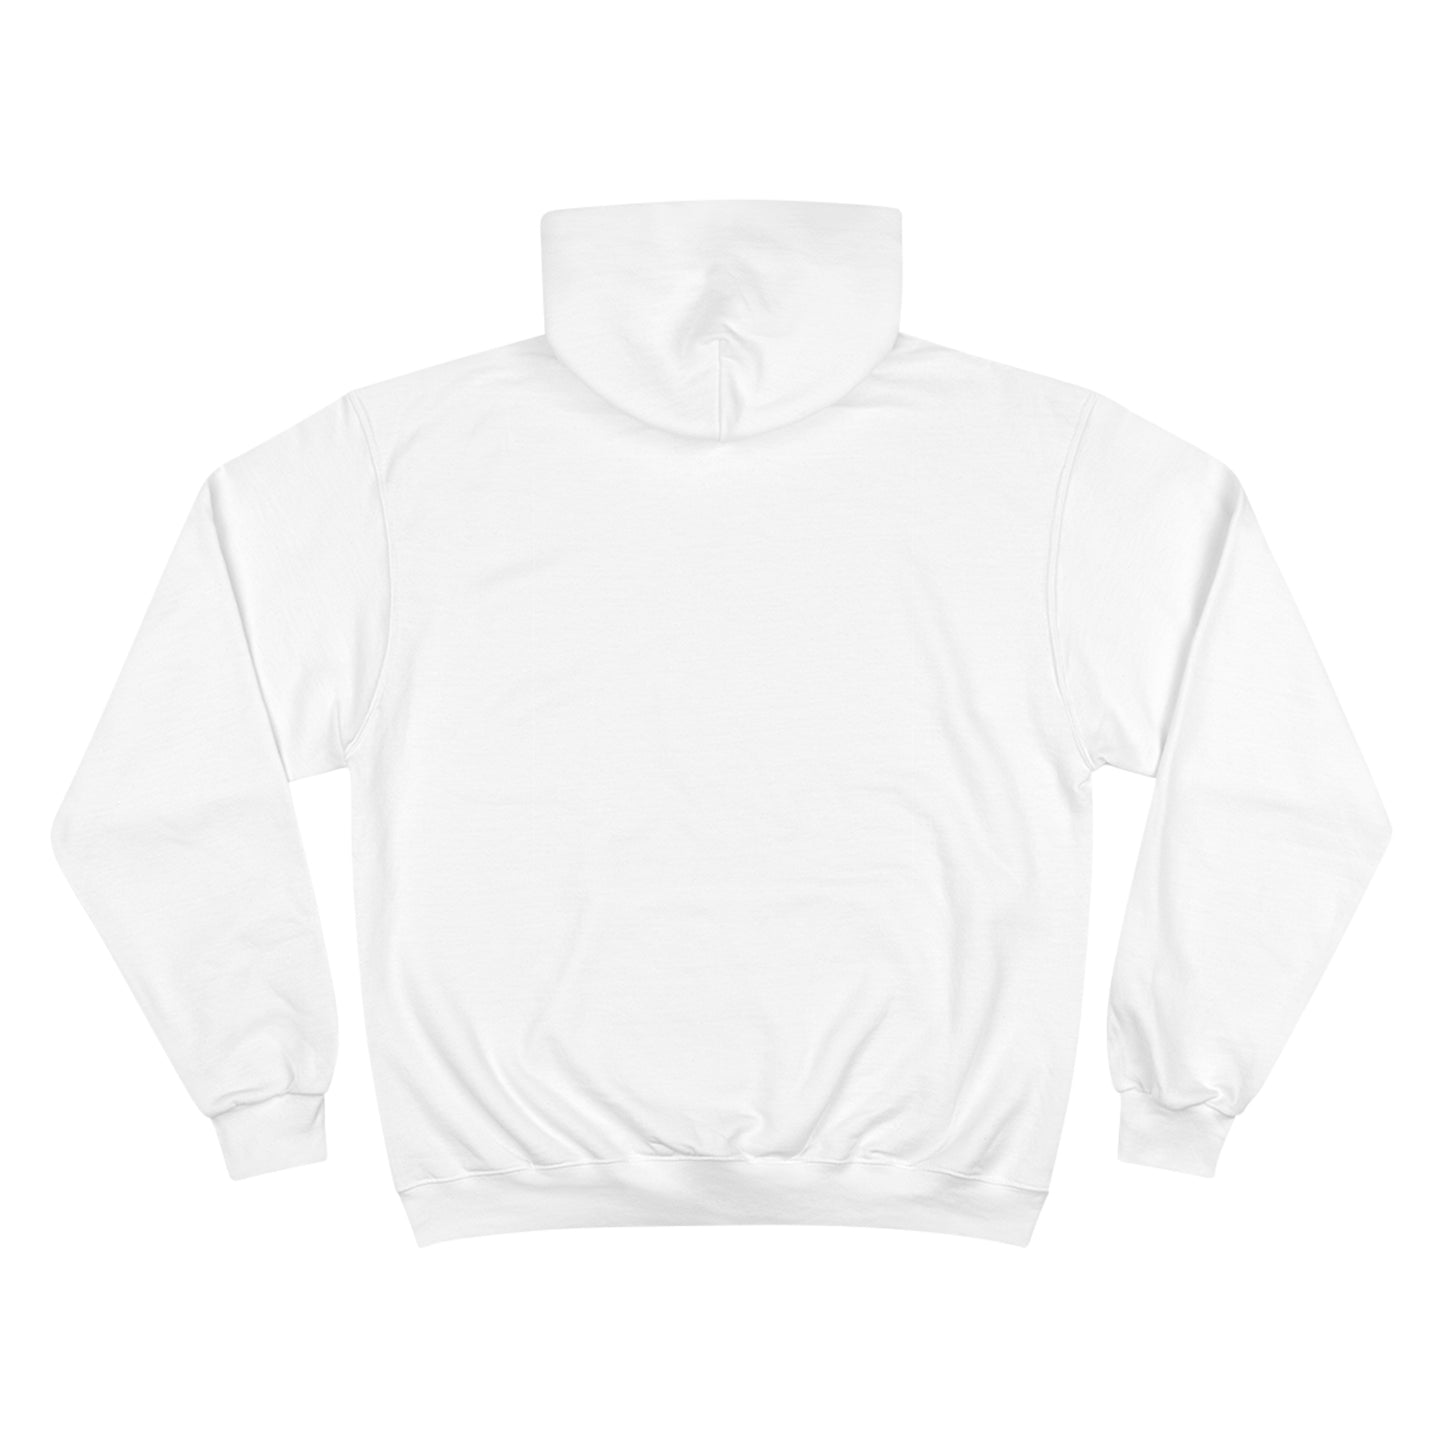 CLEVE LAND. USA (simple) – Champion Hoodie